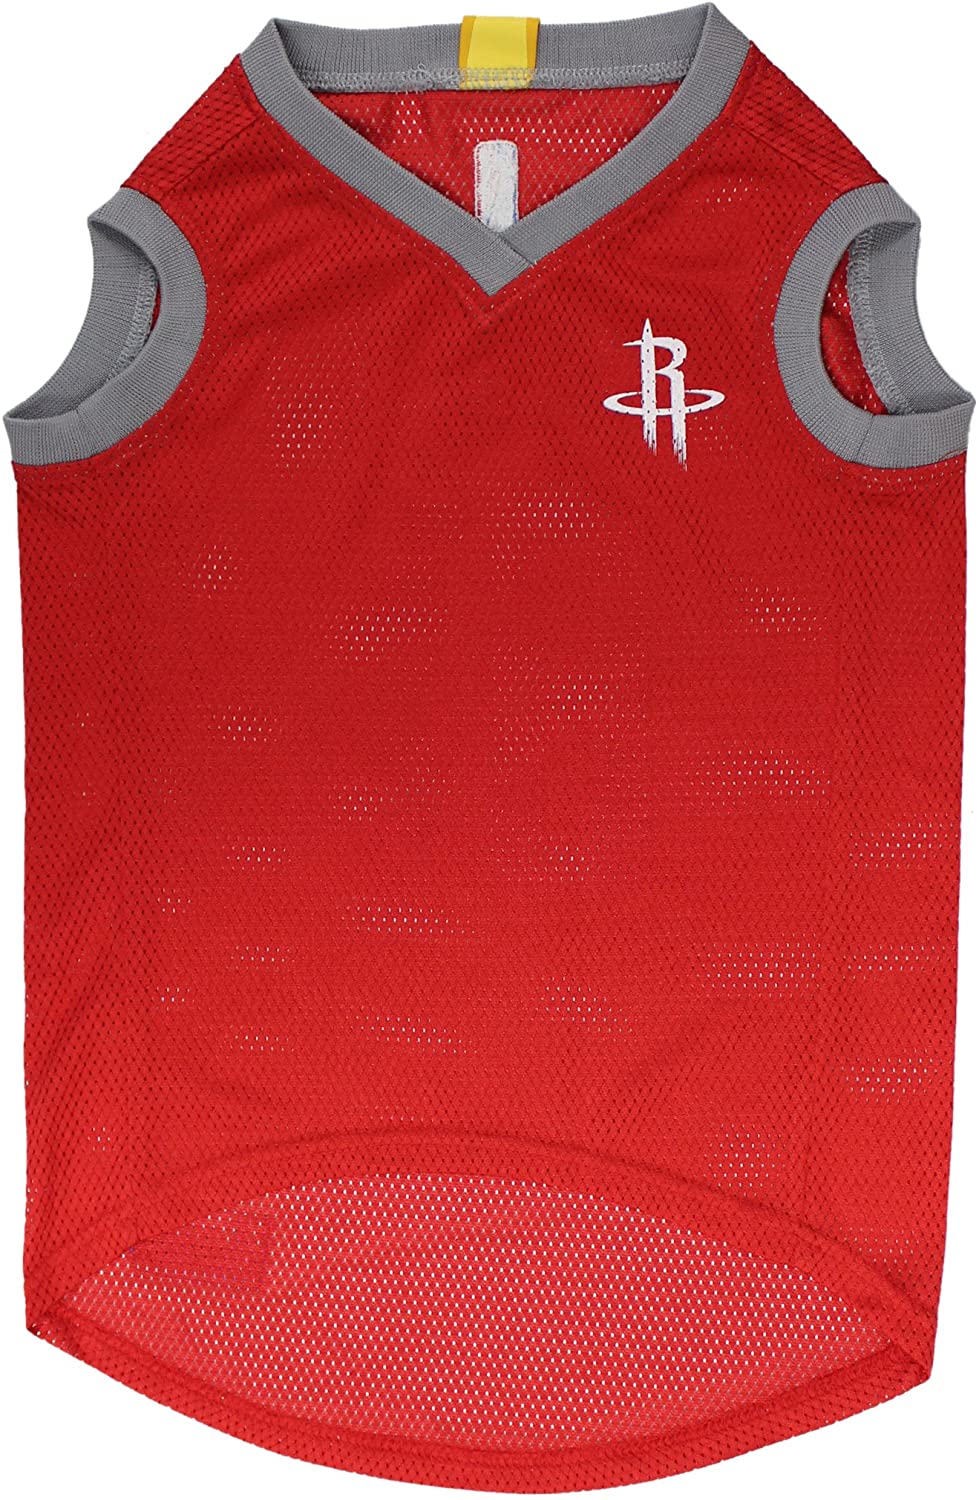 Houston Rockets Pet Jersey - 3 Red Rovers